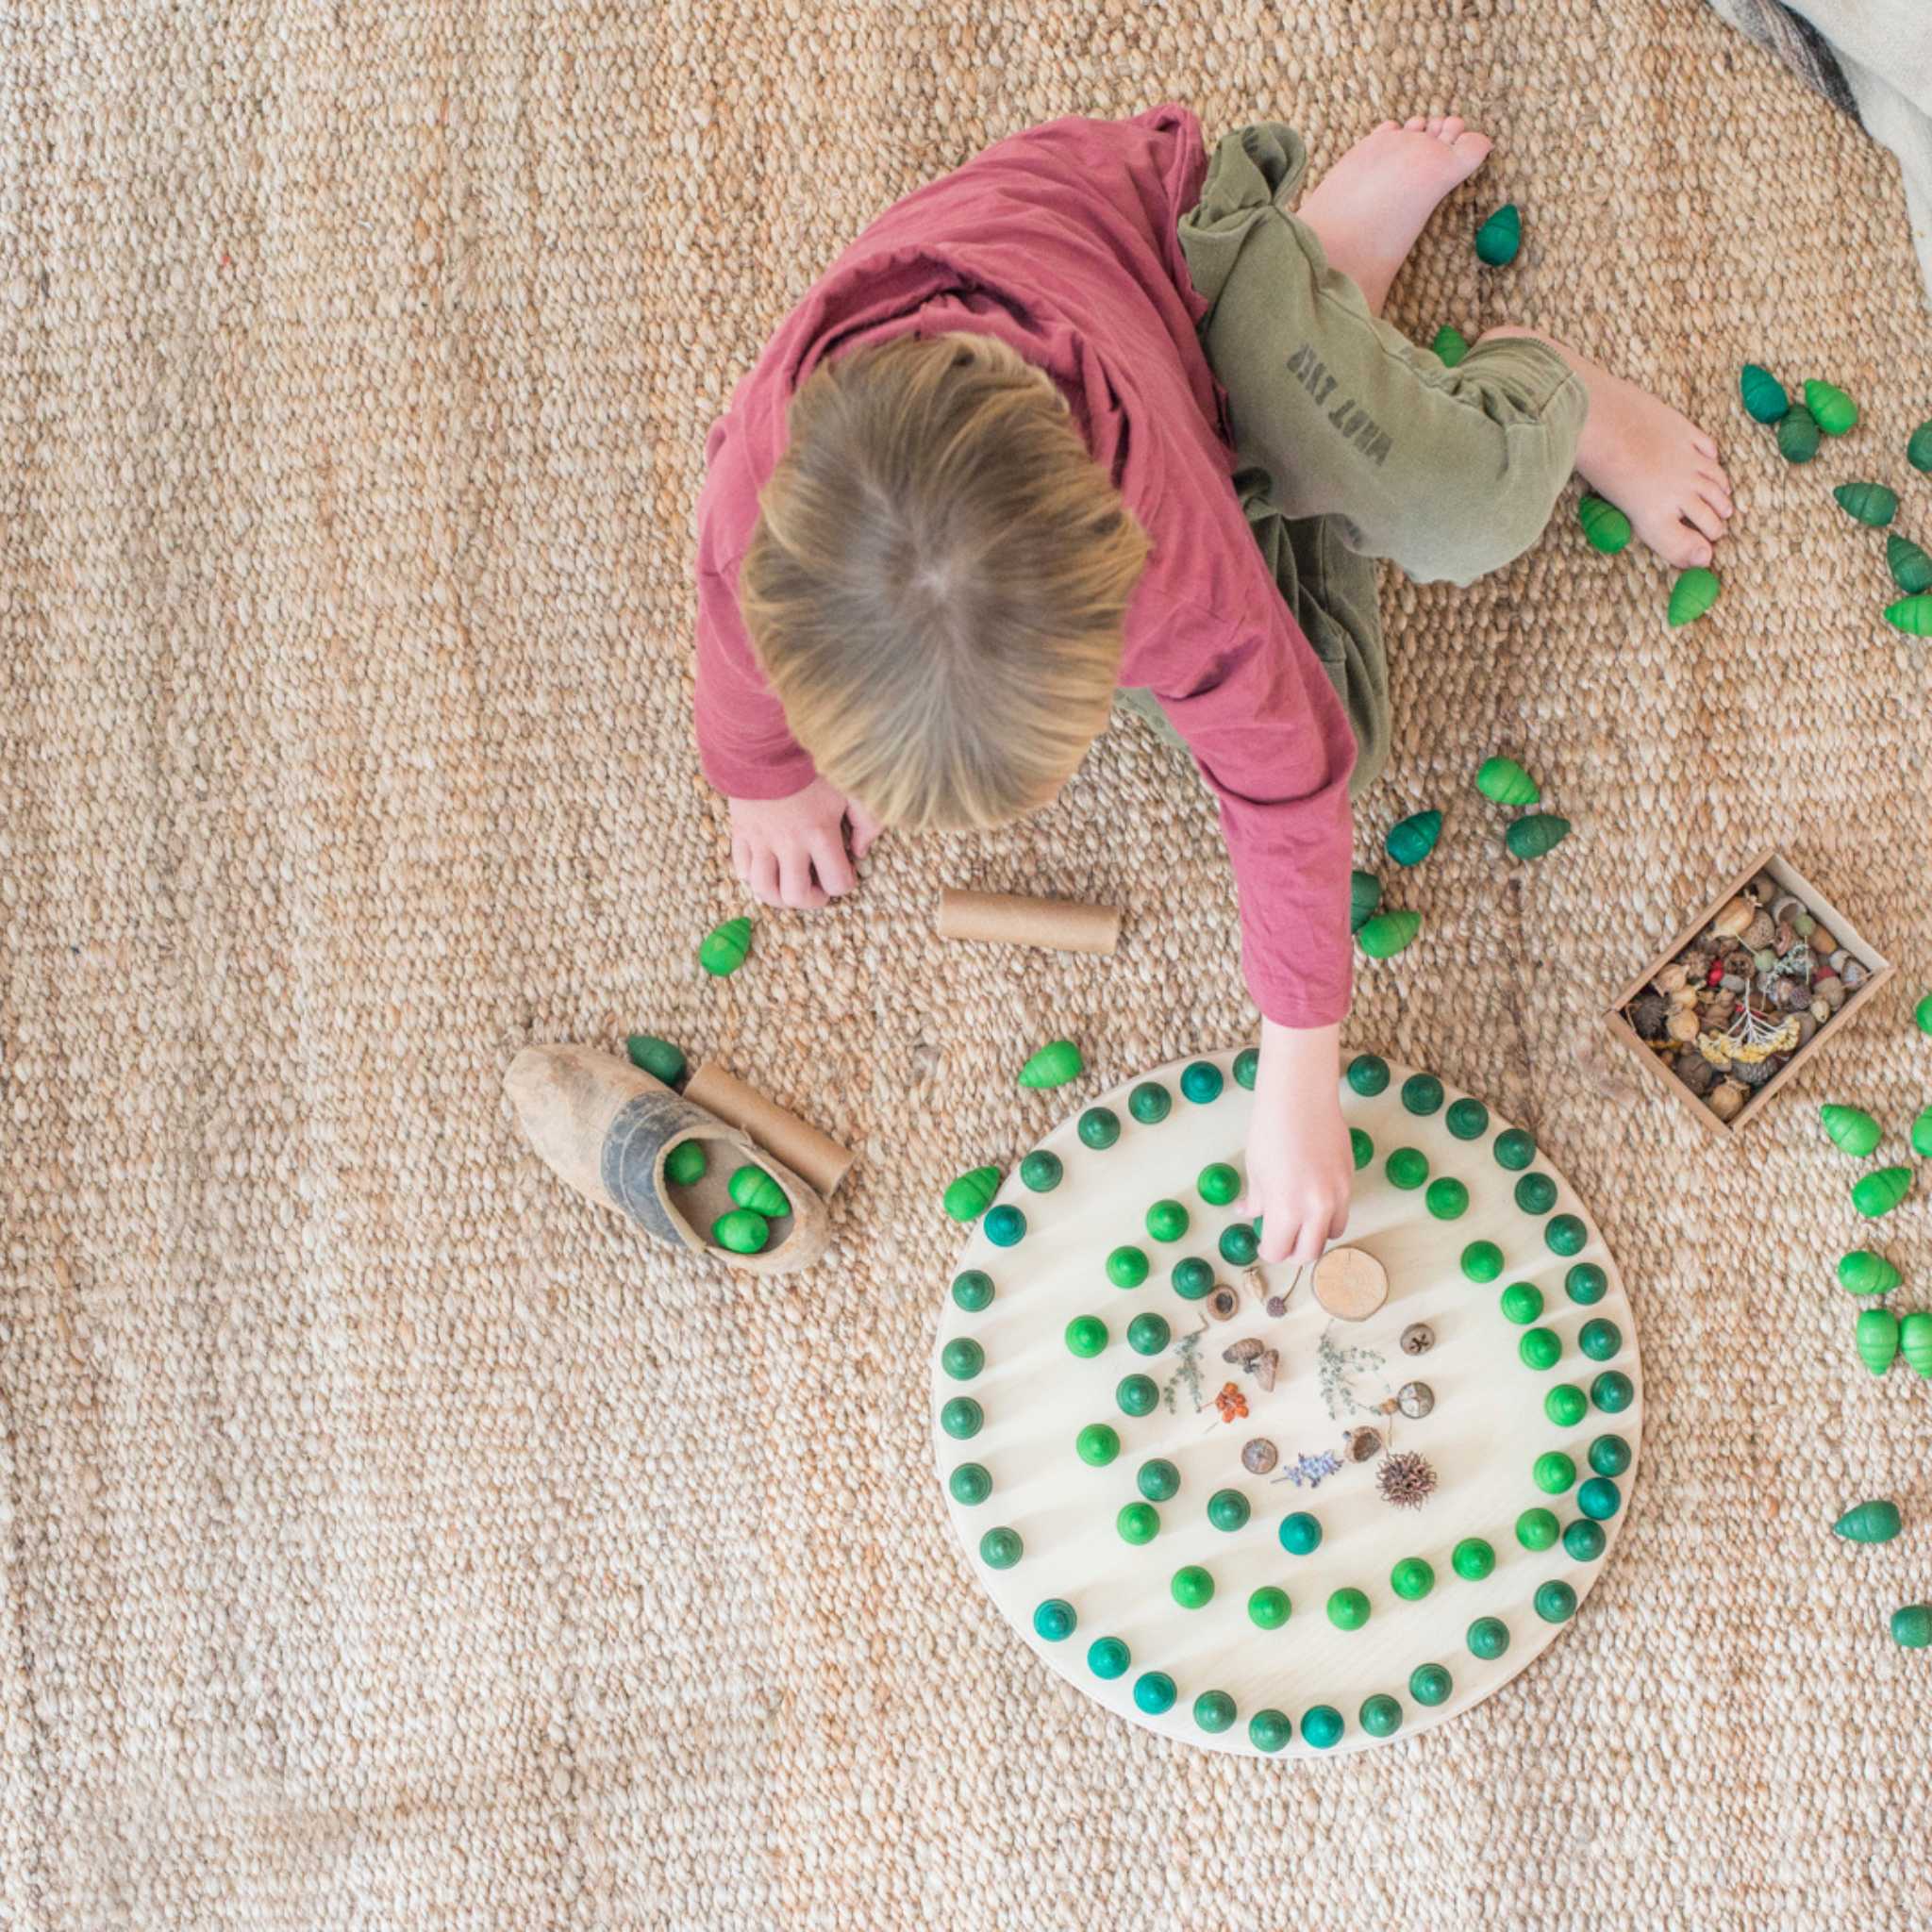 Boy Playing With Grapat Mandala Trees And Other Pieces